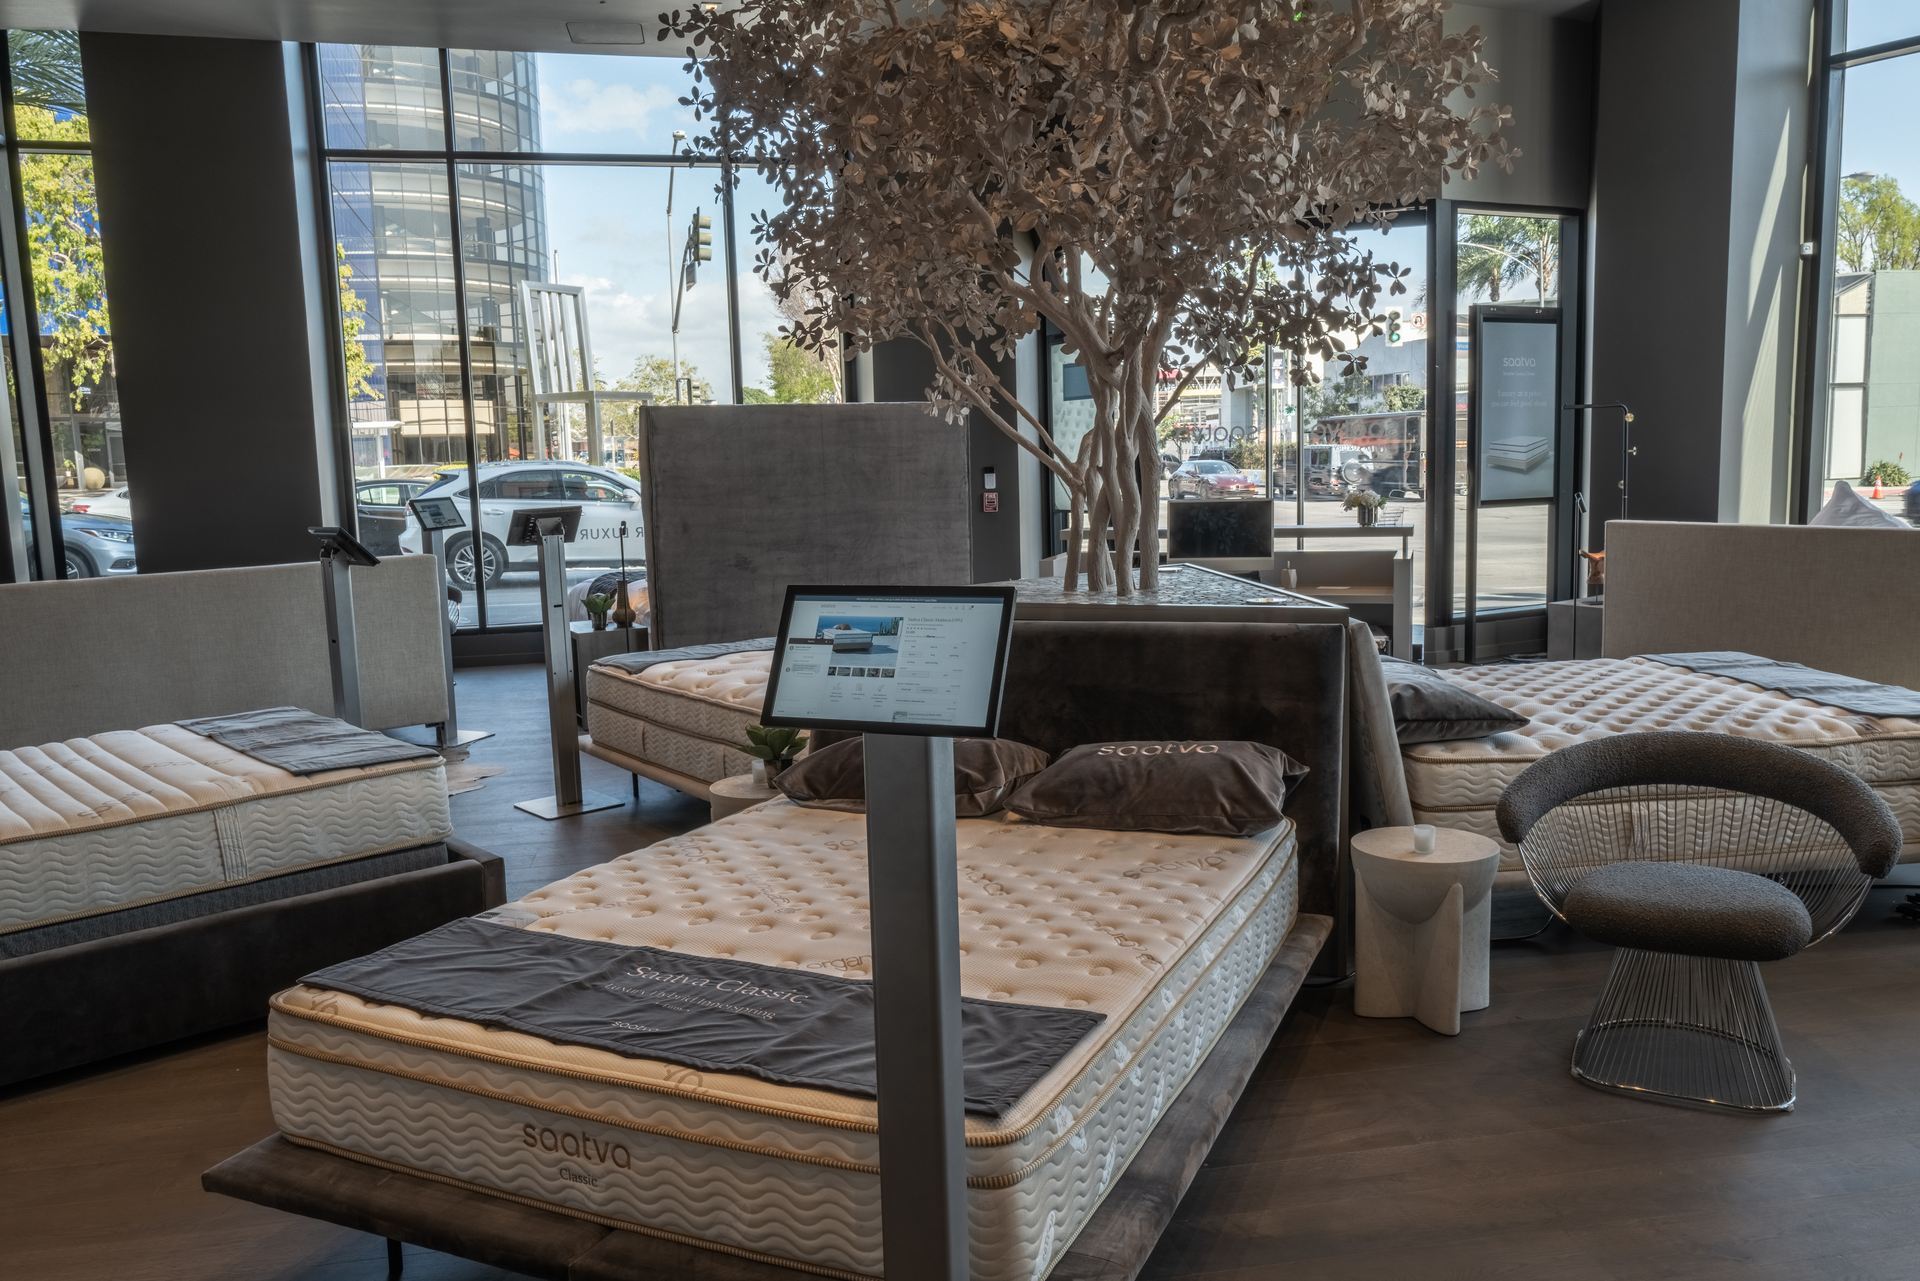 One of the Saatva Los Angeles mattress and bed displays